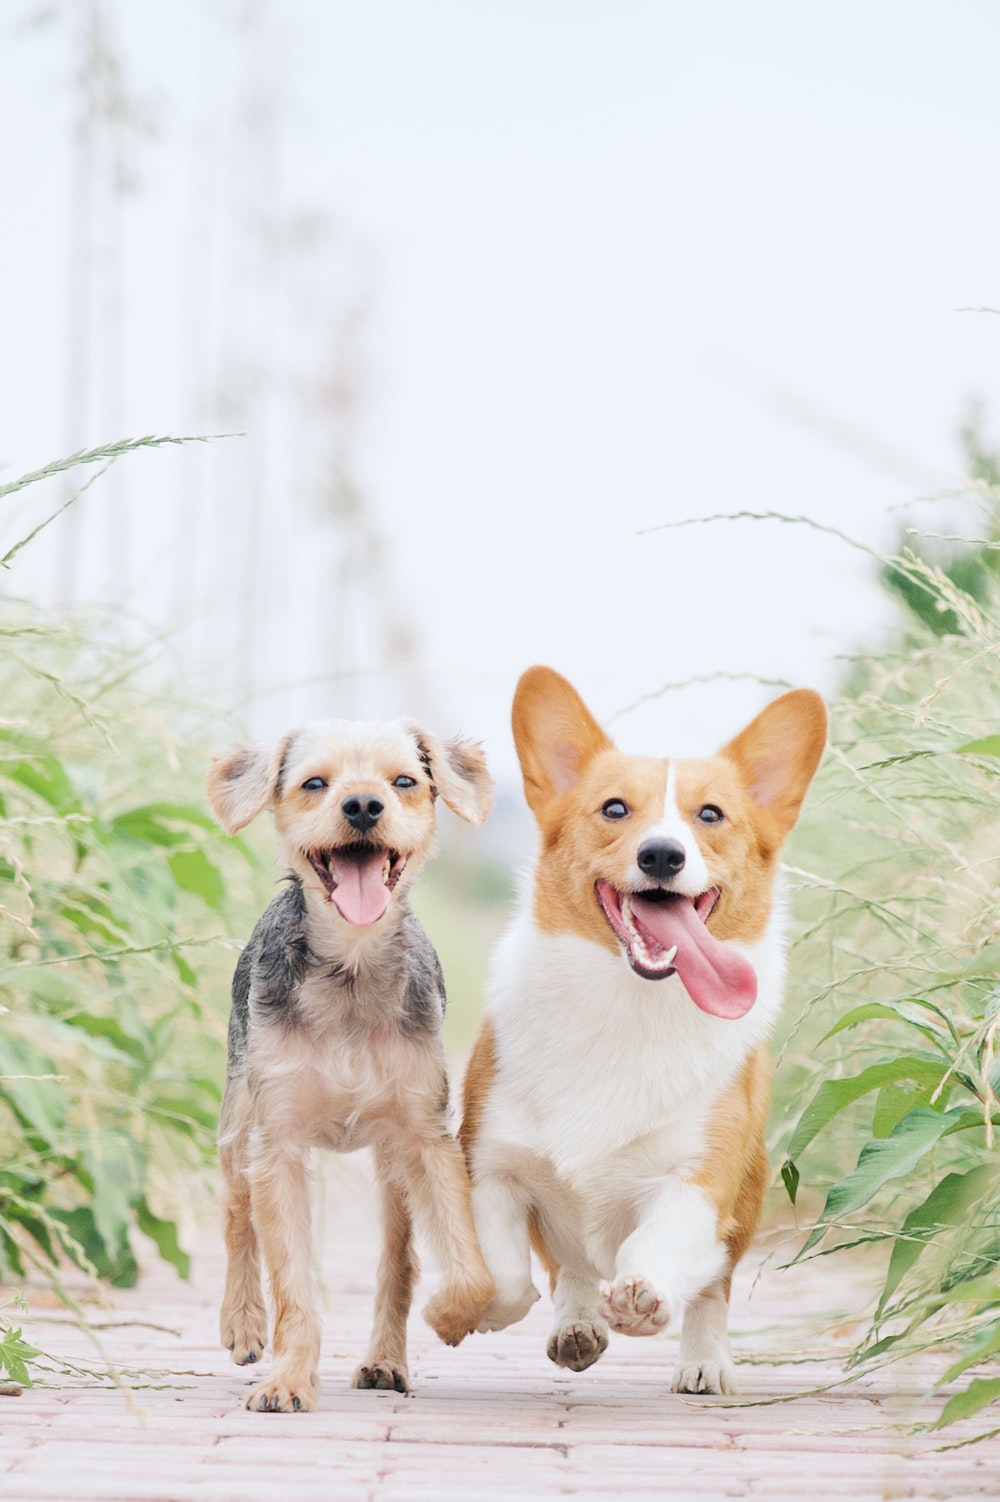 Dog Family Wallpapers